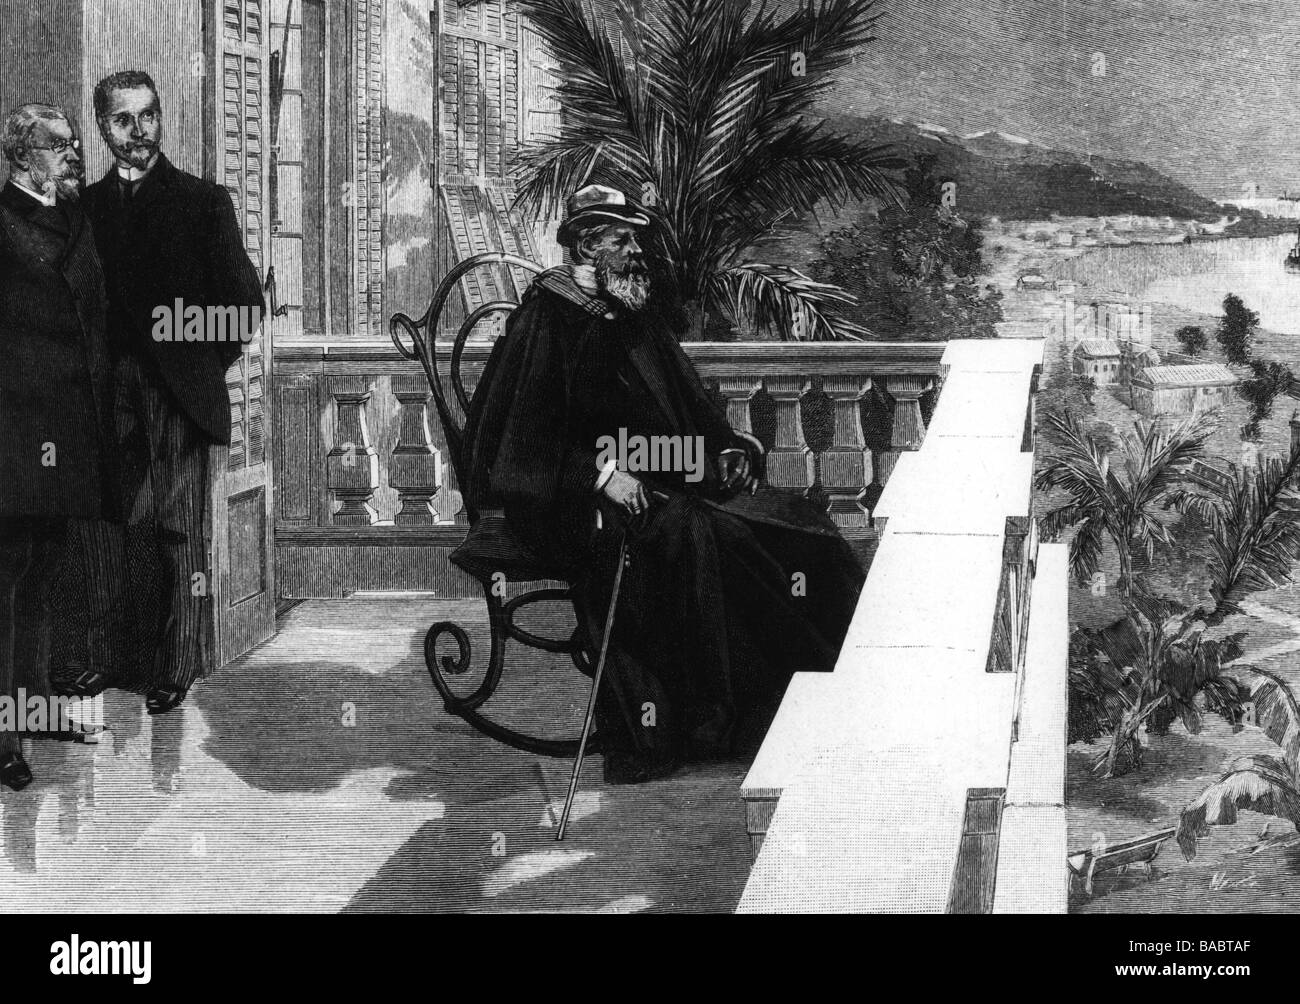 Frederick III, 18.10.1831 - 15.6.1888, German Emperor 9.3.1888 - 15.6.1888, half length, during cure at San Remo 1887 / 1888, on the balcony of Villa Zirio, wood engraving, after drawing by F. de Haenen, Stock Photo